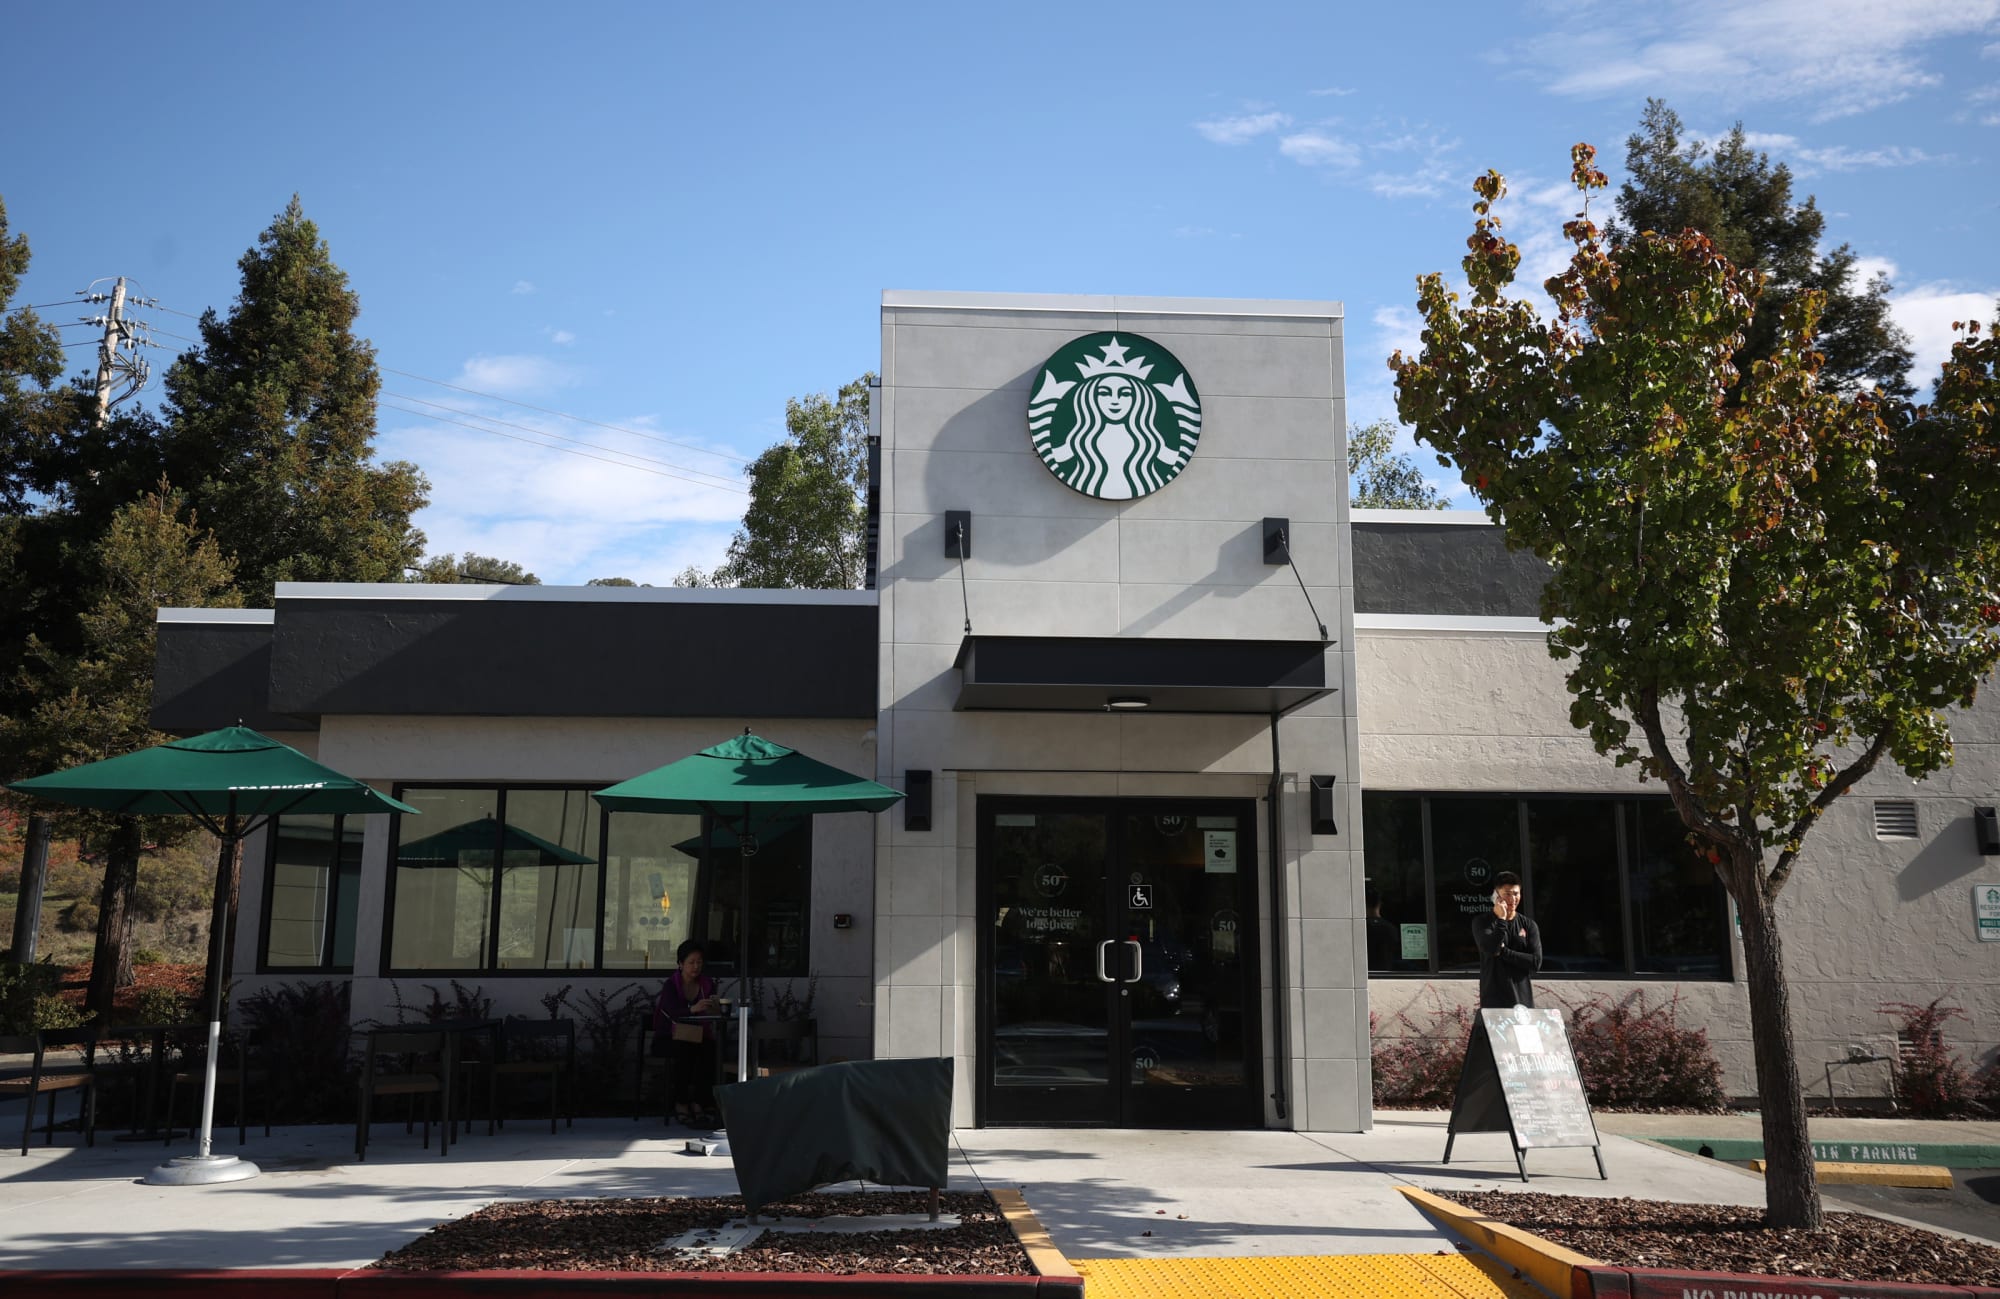 Photo of Starbucks Labor Day hours: Is Starbucks open on Labor Day? [Updated September 2022]